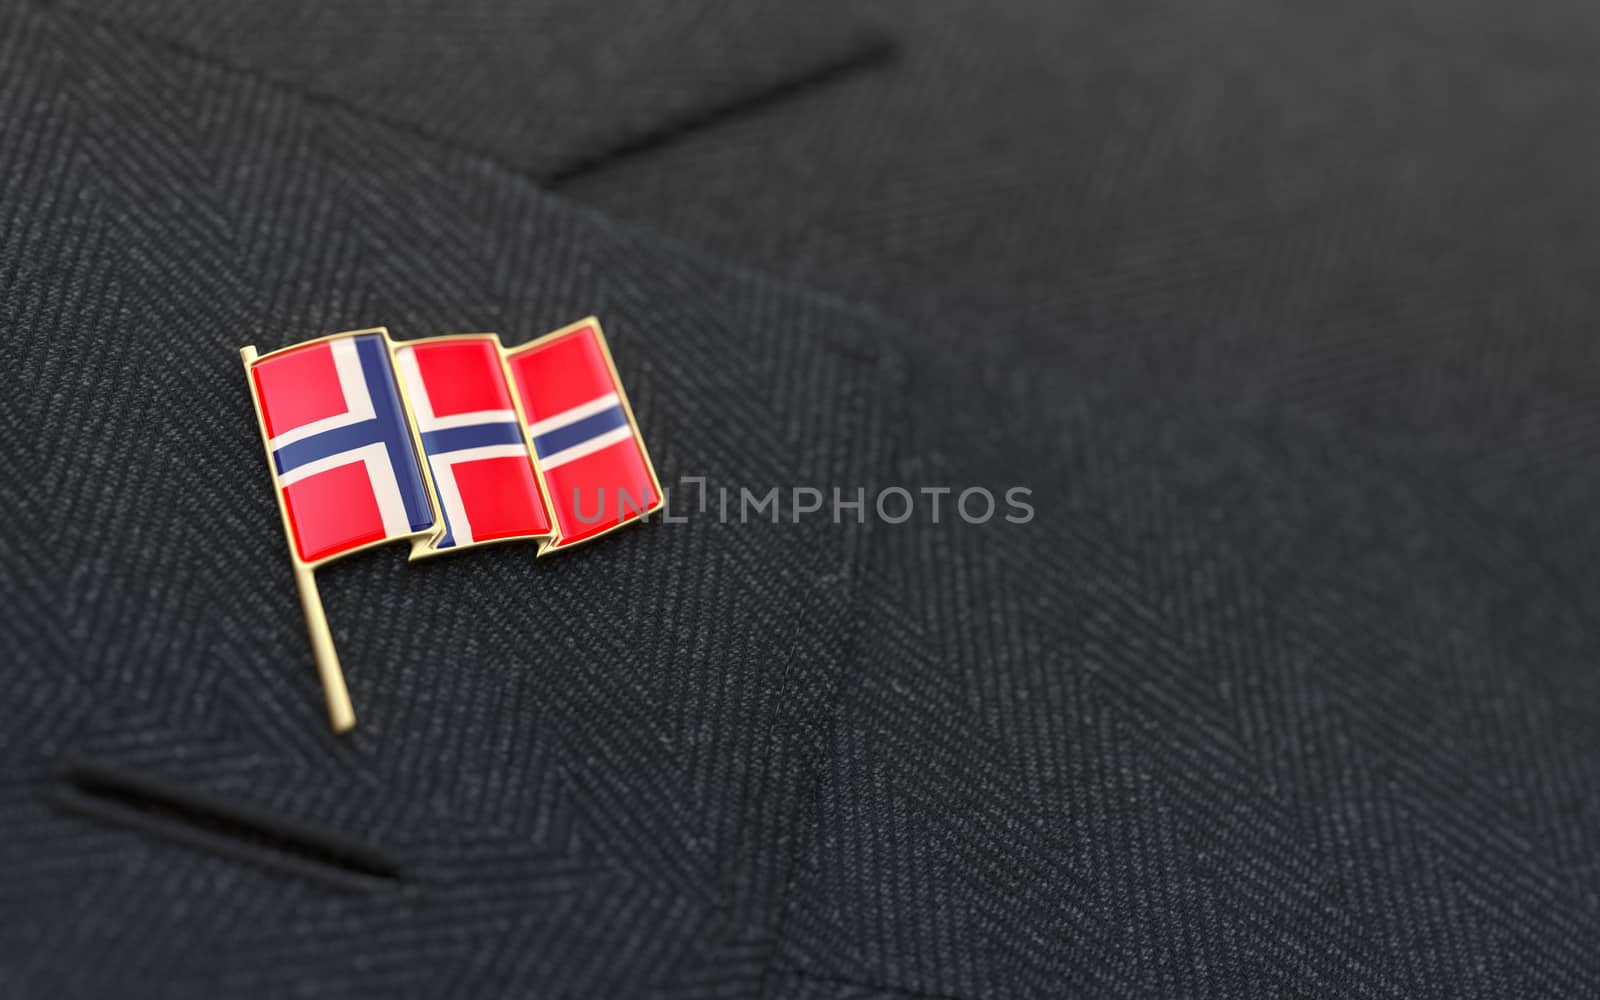 Norway flag lapel pin on the collar of a business suit jacket shows patriotism